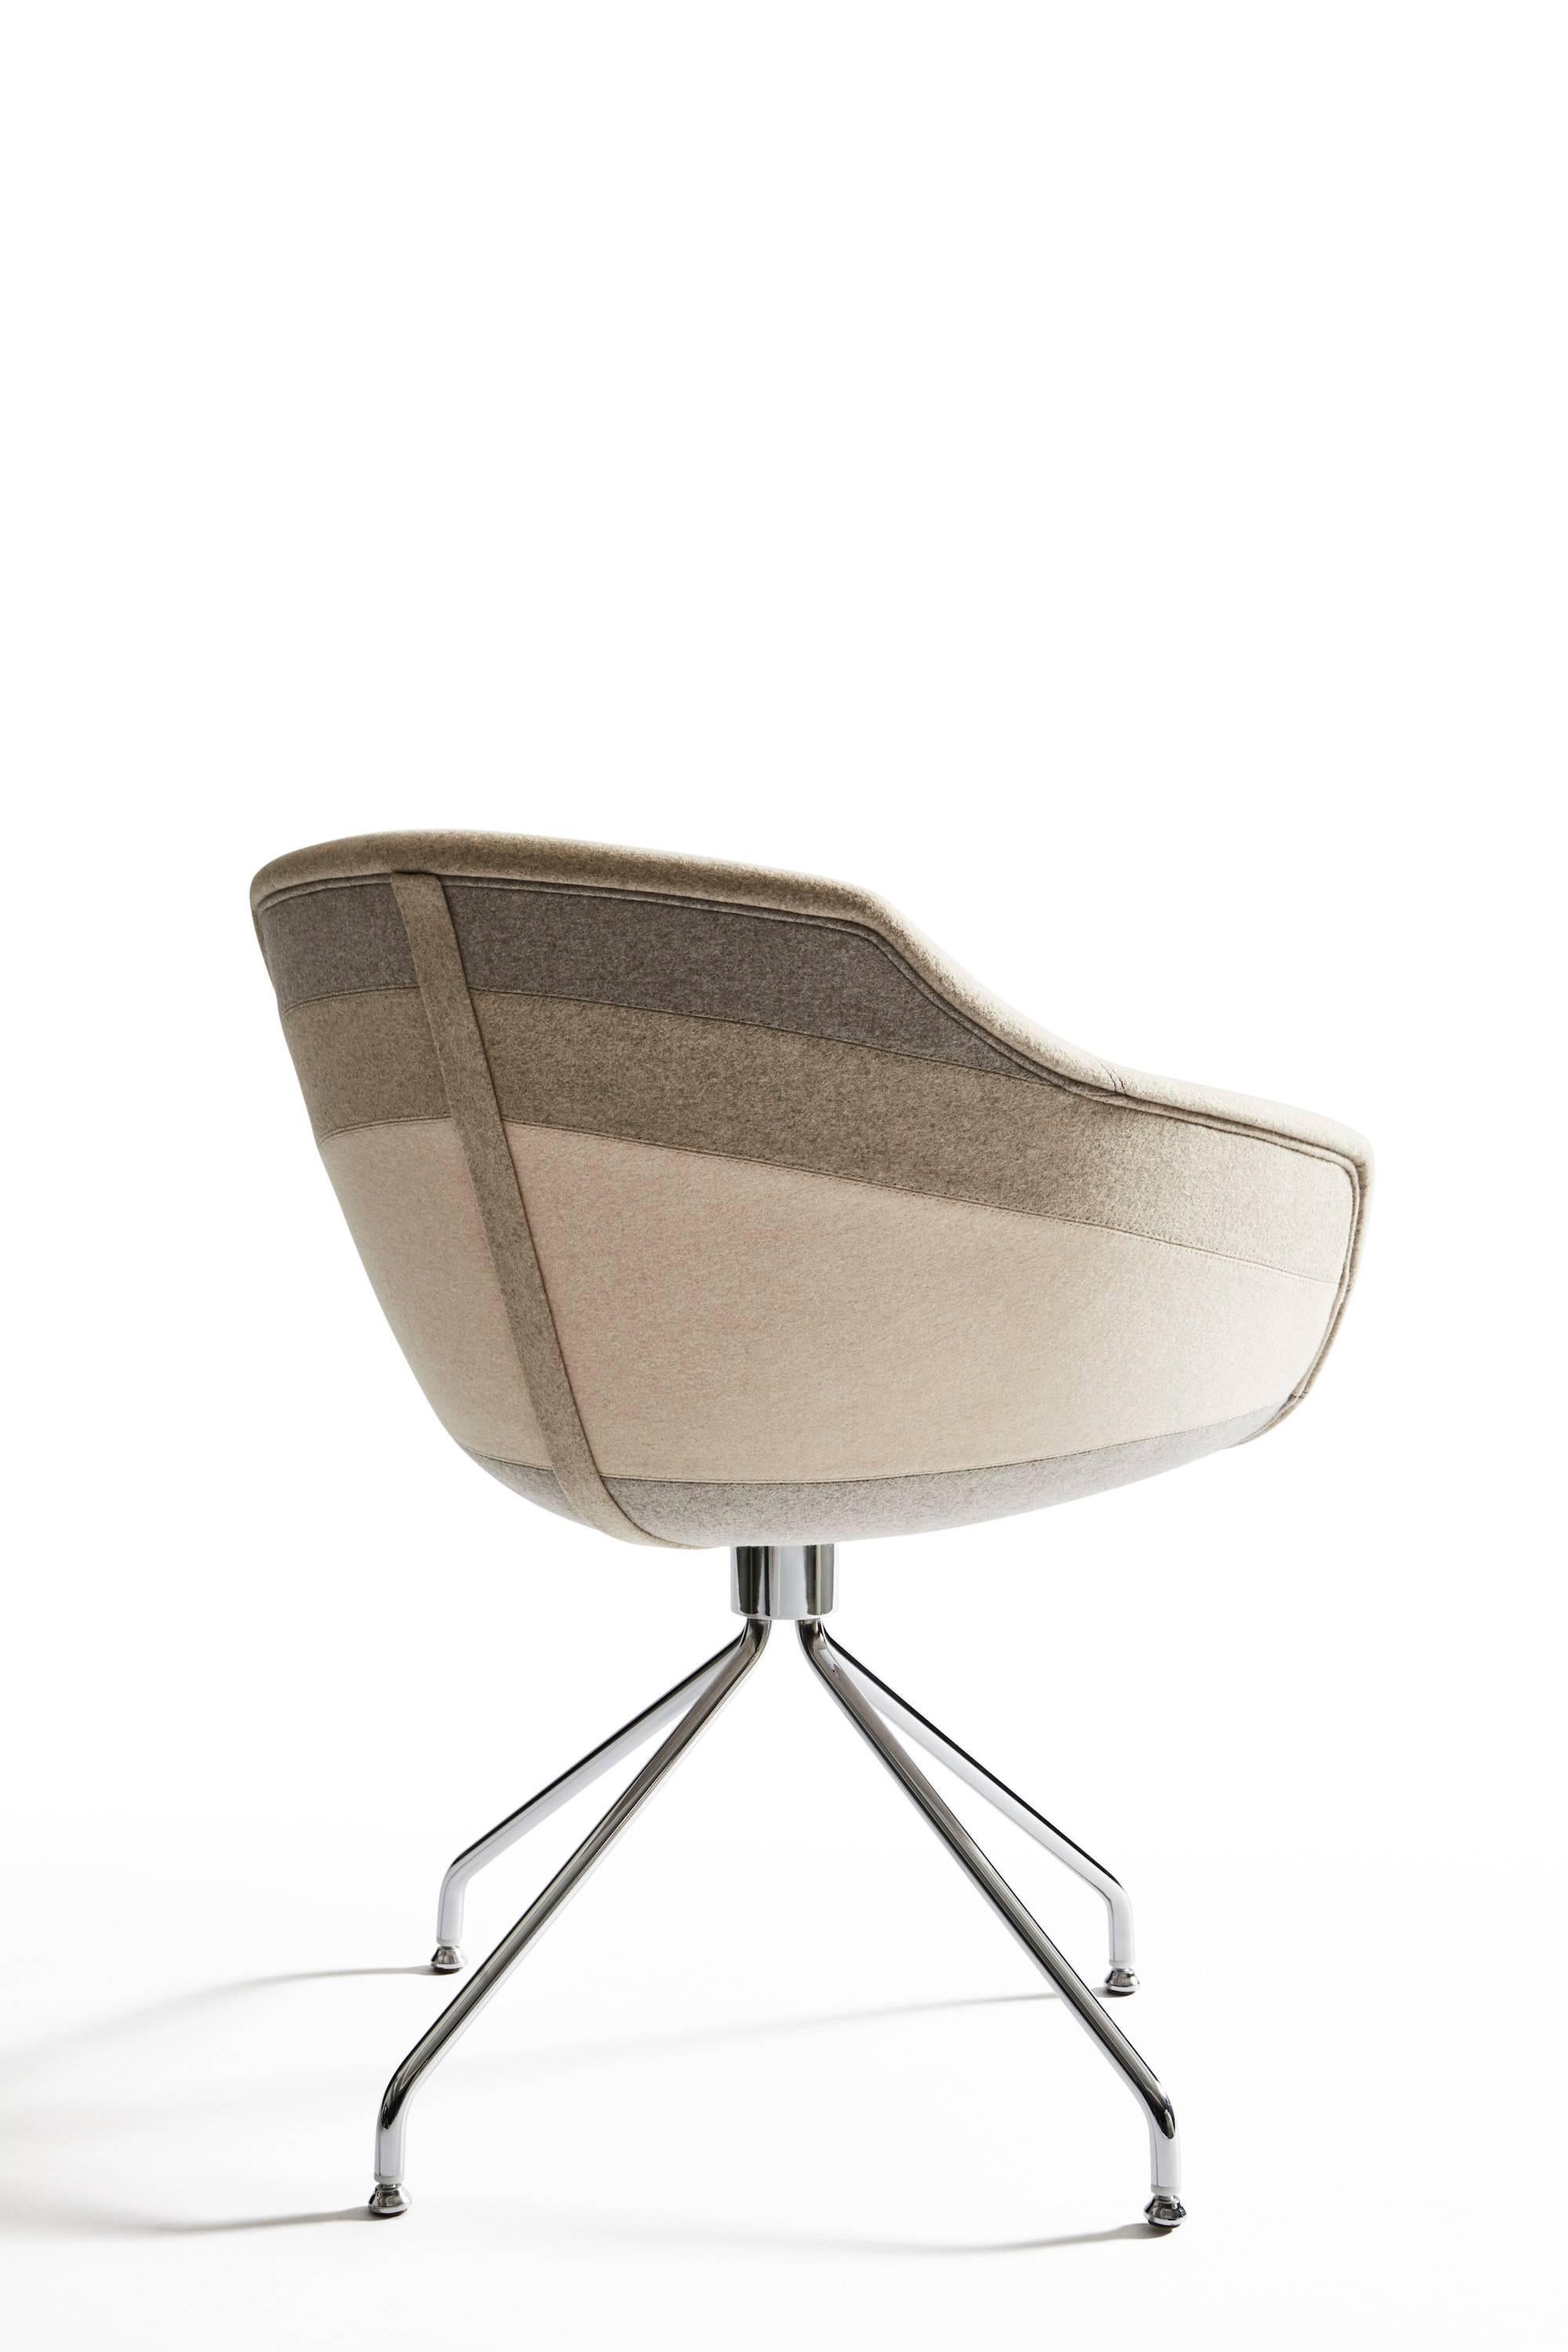 Dutch Moooi Canal Chair by Luca Nichetto in Seven Fabric Stripe & Three Base Options For Sale